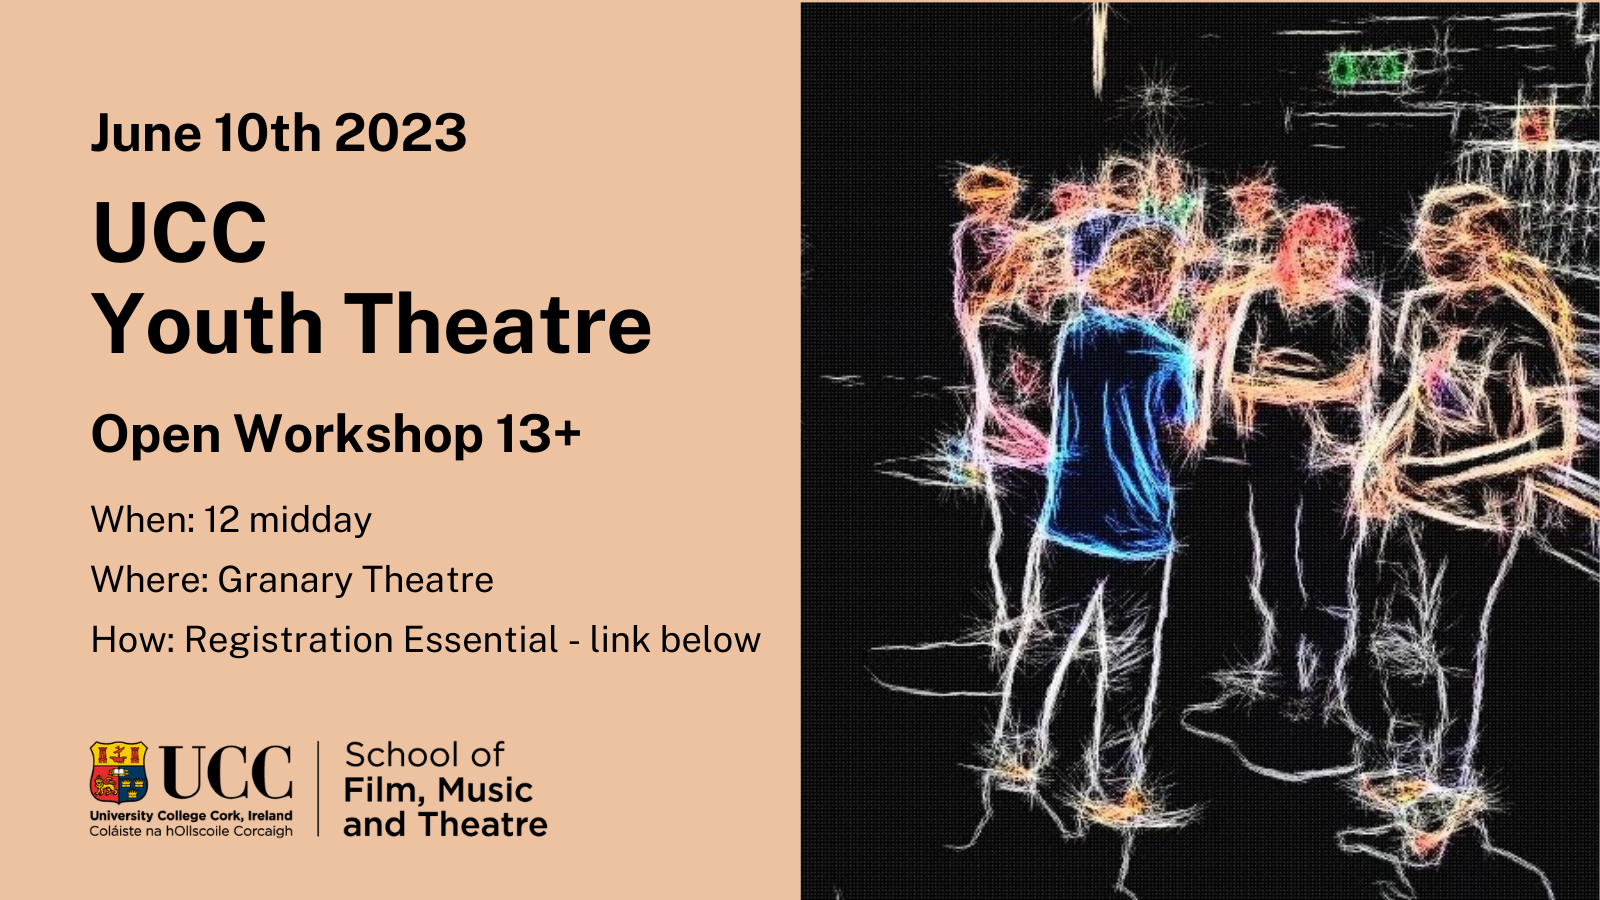 UCC Youth Theatre hosts Open Workshop